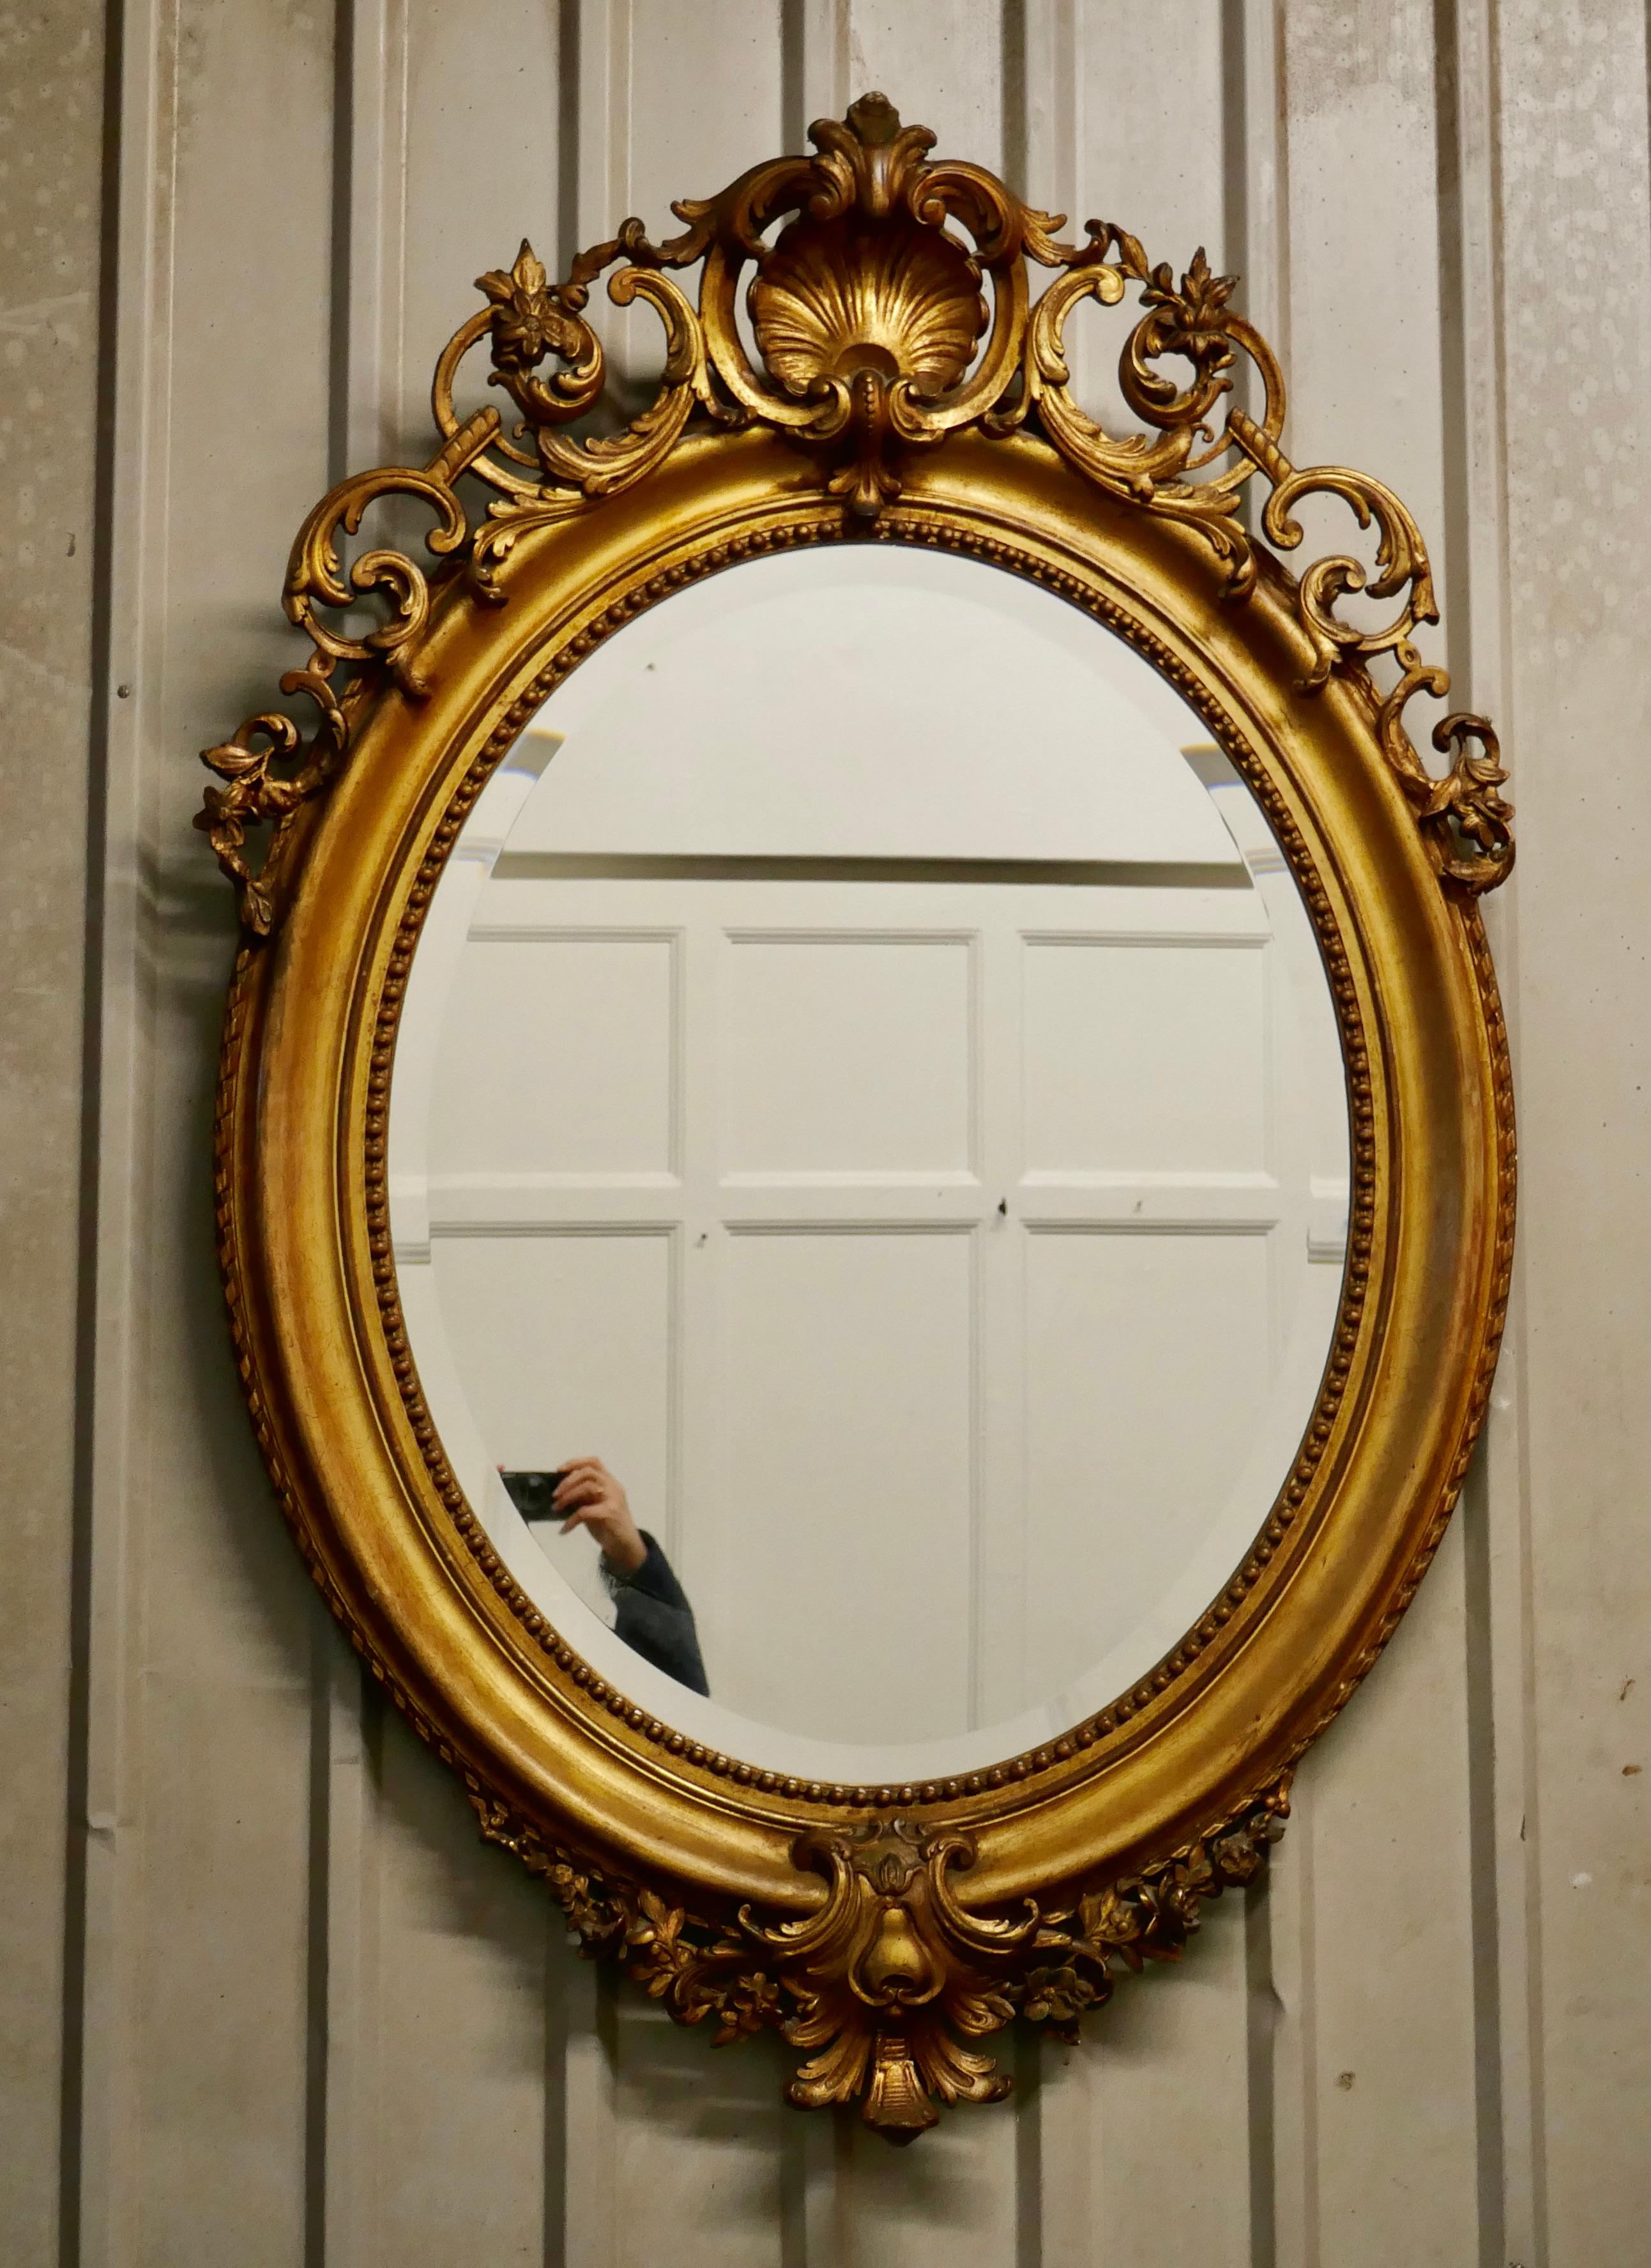 A Very Large French Rococo Oval Gilt Wall Mirror

The Mirror has an exquisite gilt Frame in the Rococo Style, it is elaborately decorated with shells, swags and Leaves with a neat rope edge
The large age darkened Oval frame is made in gesso and is